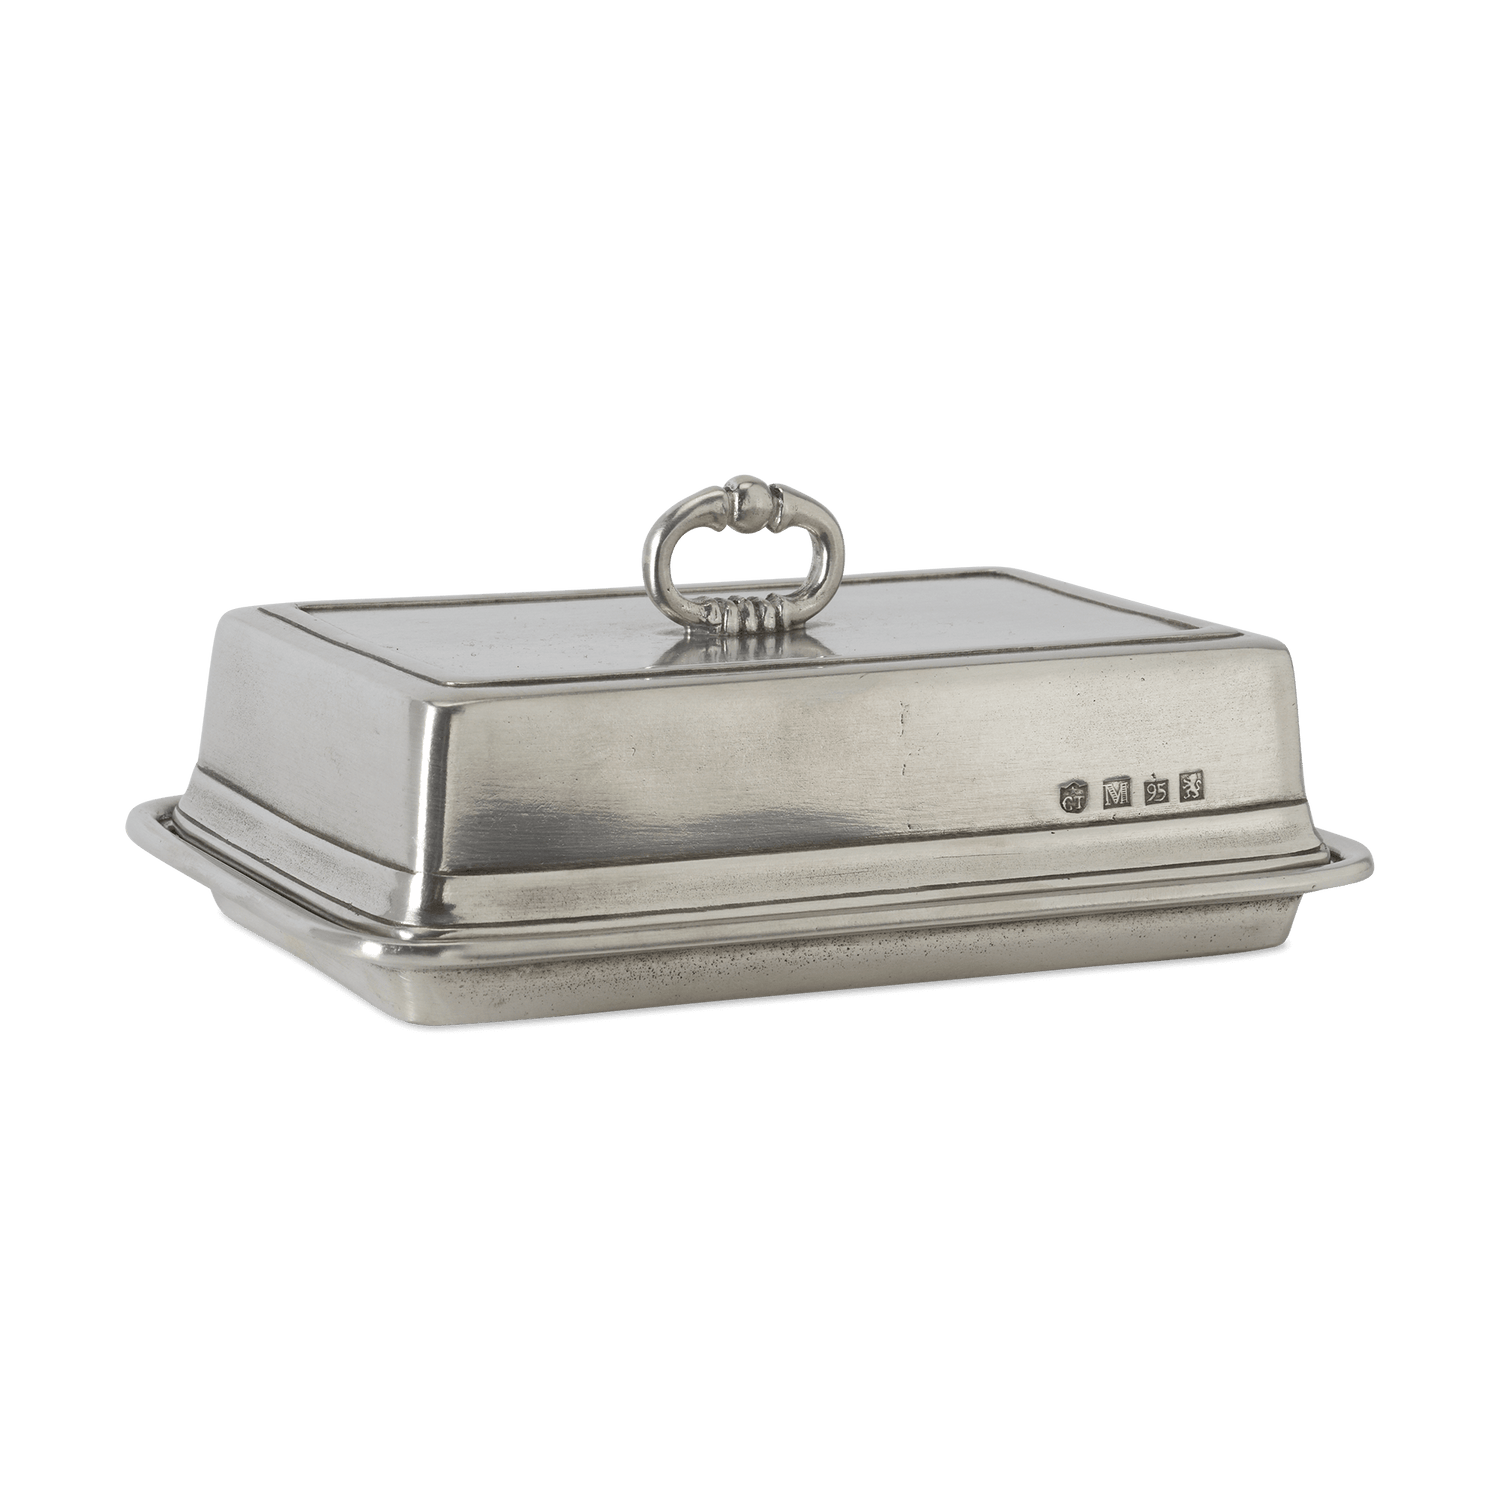 Stainless Steel Butter Mill @